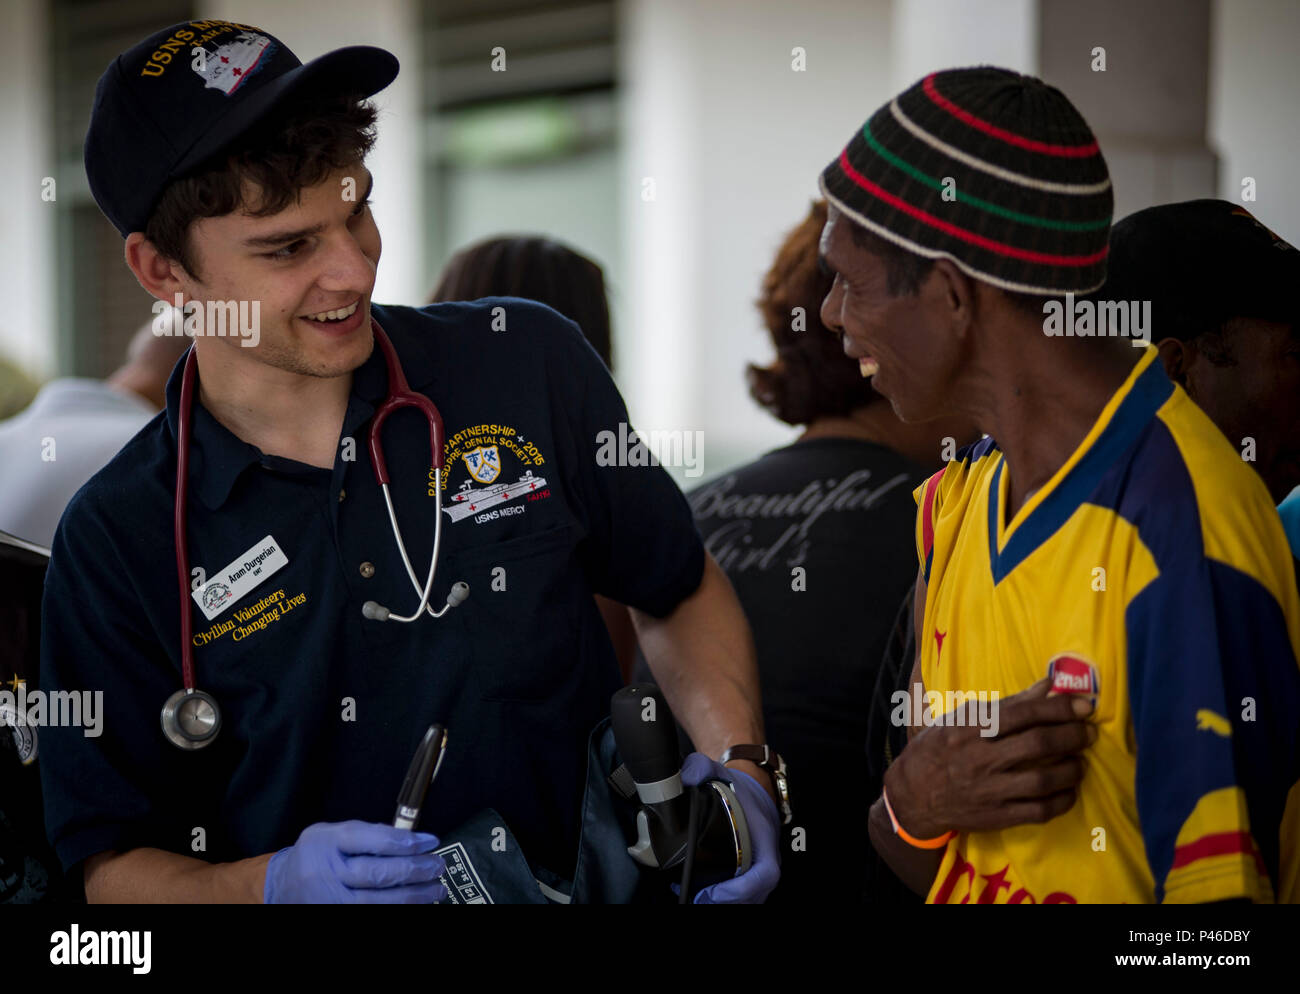 160613-N-QW941-266 DILI, Timor Leste (June 13, 2016) Aram Durgerian, a non-governmental organization volunteer and native of San Fransisco, attached to USNS Mercy (T-AH 19) talks with a Timorese man while at Gleno Community Health Center. Mercy is currently in Timor Leste supporting Pacific Partnership 2016. This year marks the sixth time the mission visited Timor Leste since its first visit in 2006. Medical, engineering and various other personnel embarked aboard Mercy are working side-by-side with partner nation counterparts, exchanging ideas, building best practices and relationships to ens Stock Photo